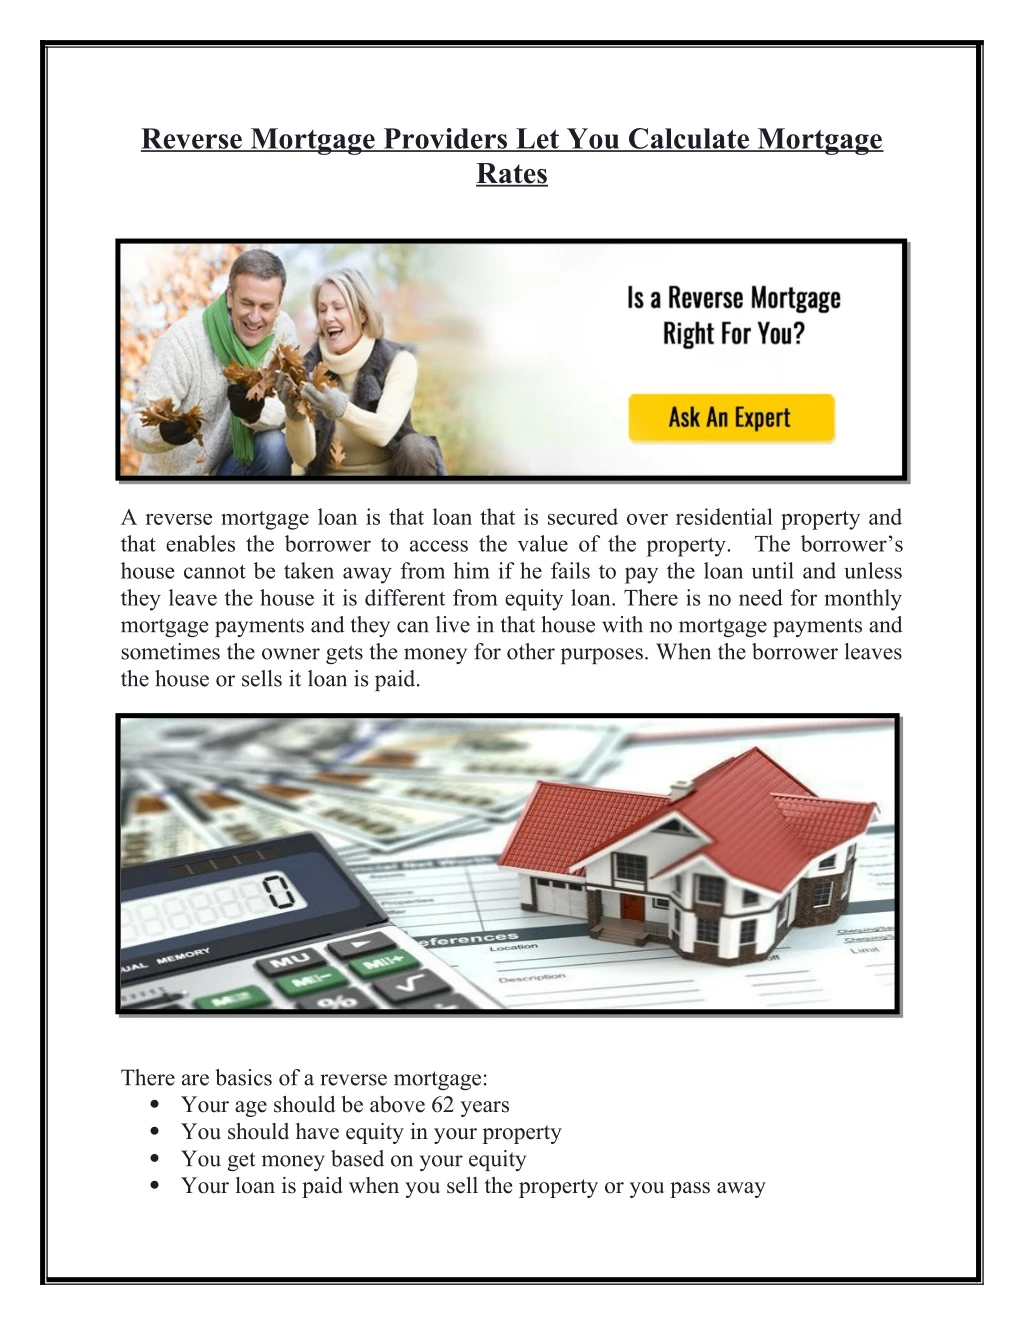 reverse mortgage providers let you calculate